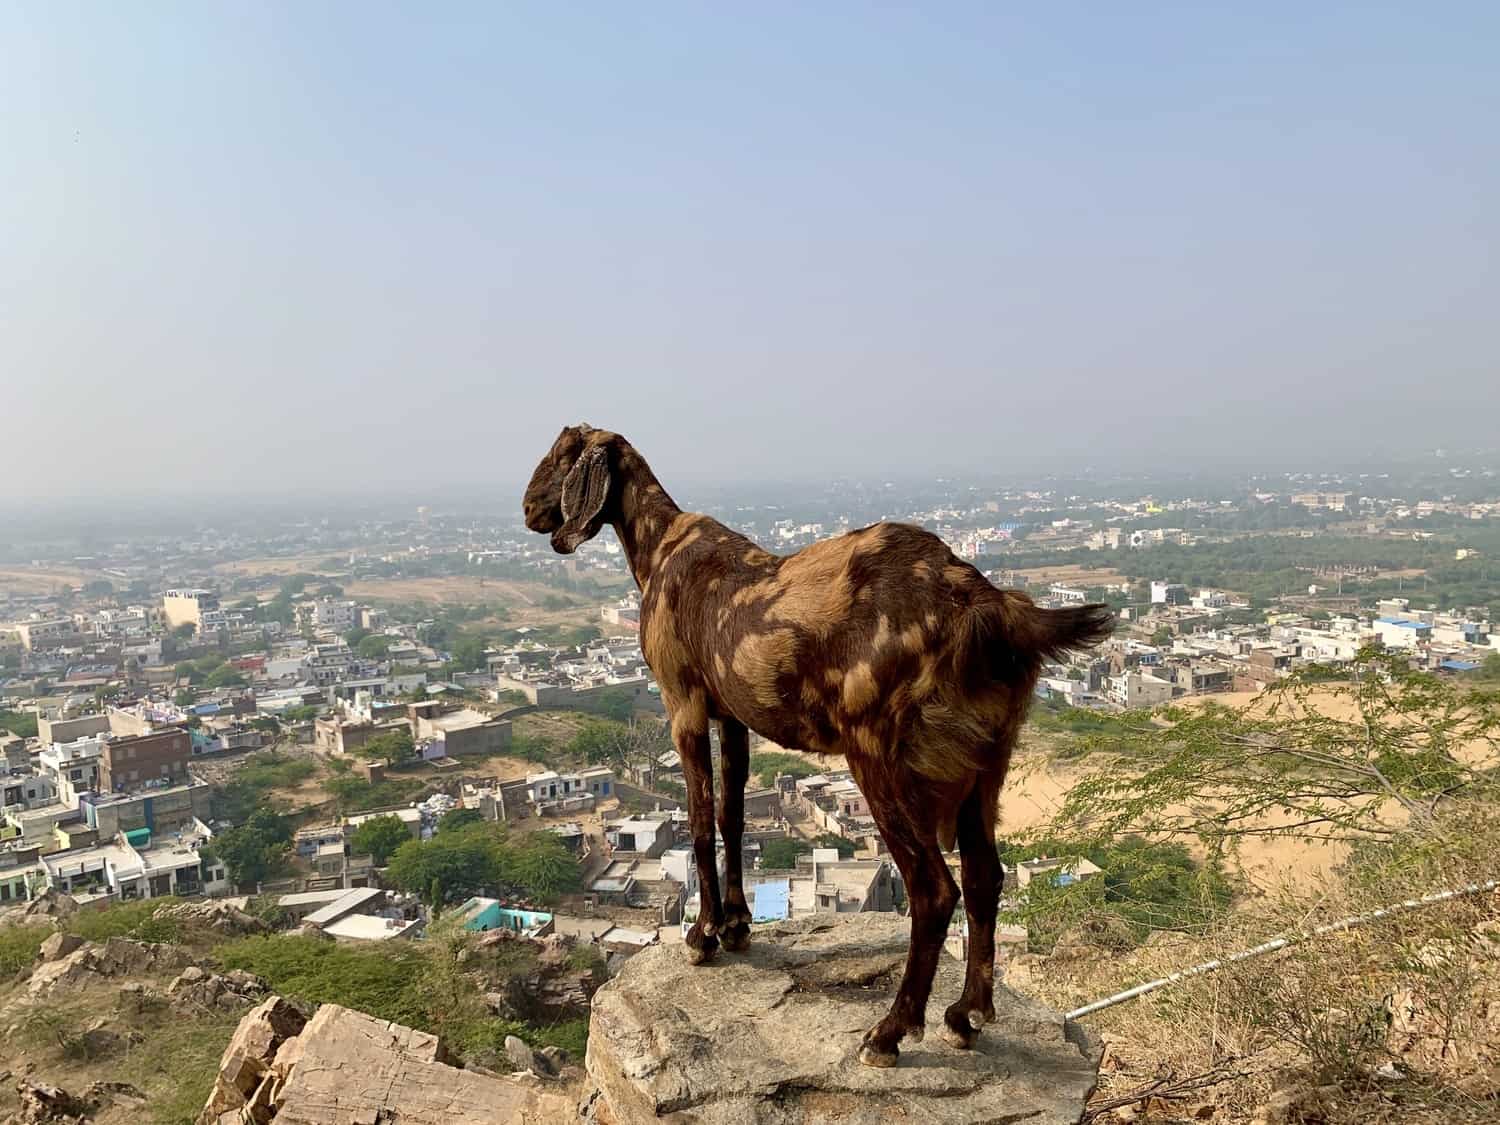 A goat looking out over pushkar